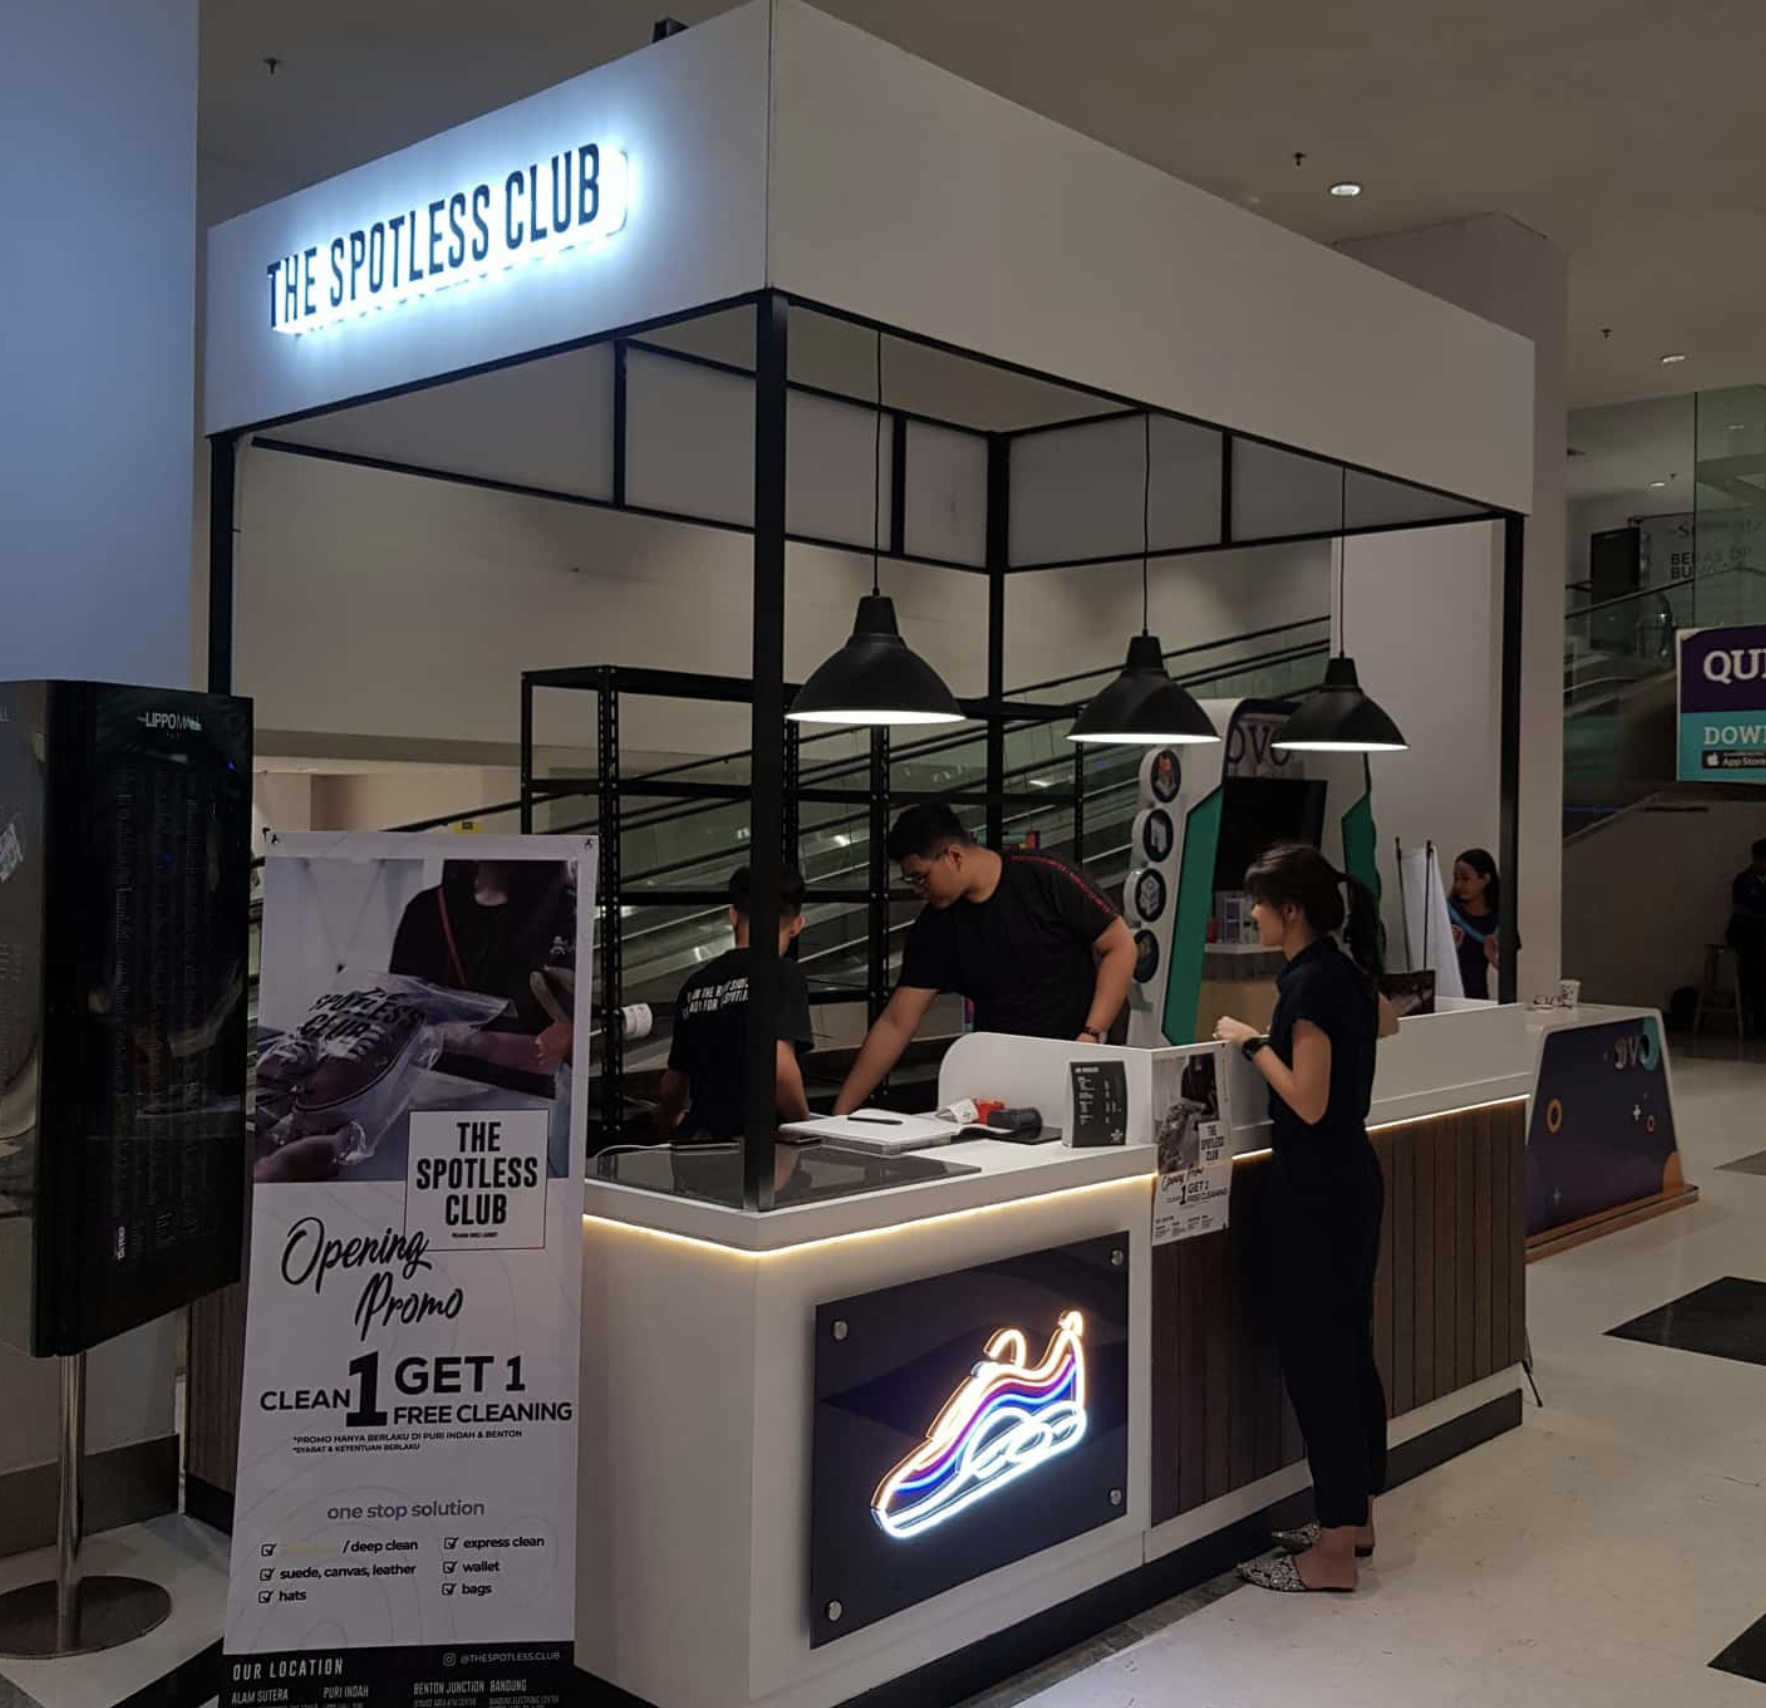 The Spotless Club shop front in lippo mall puri st. moritz